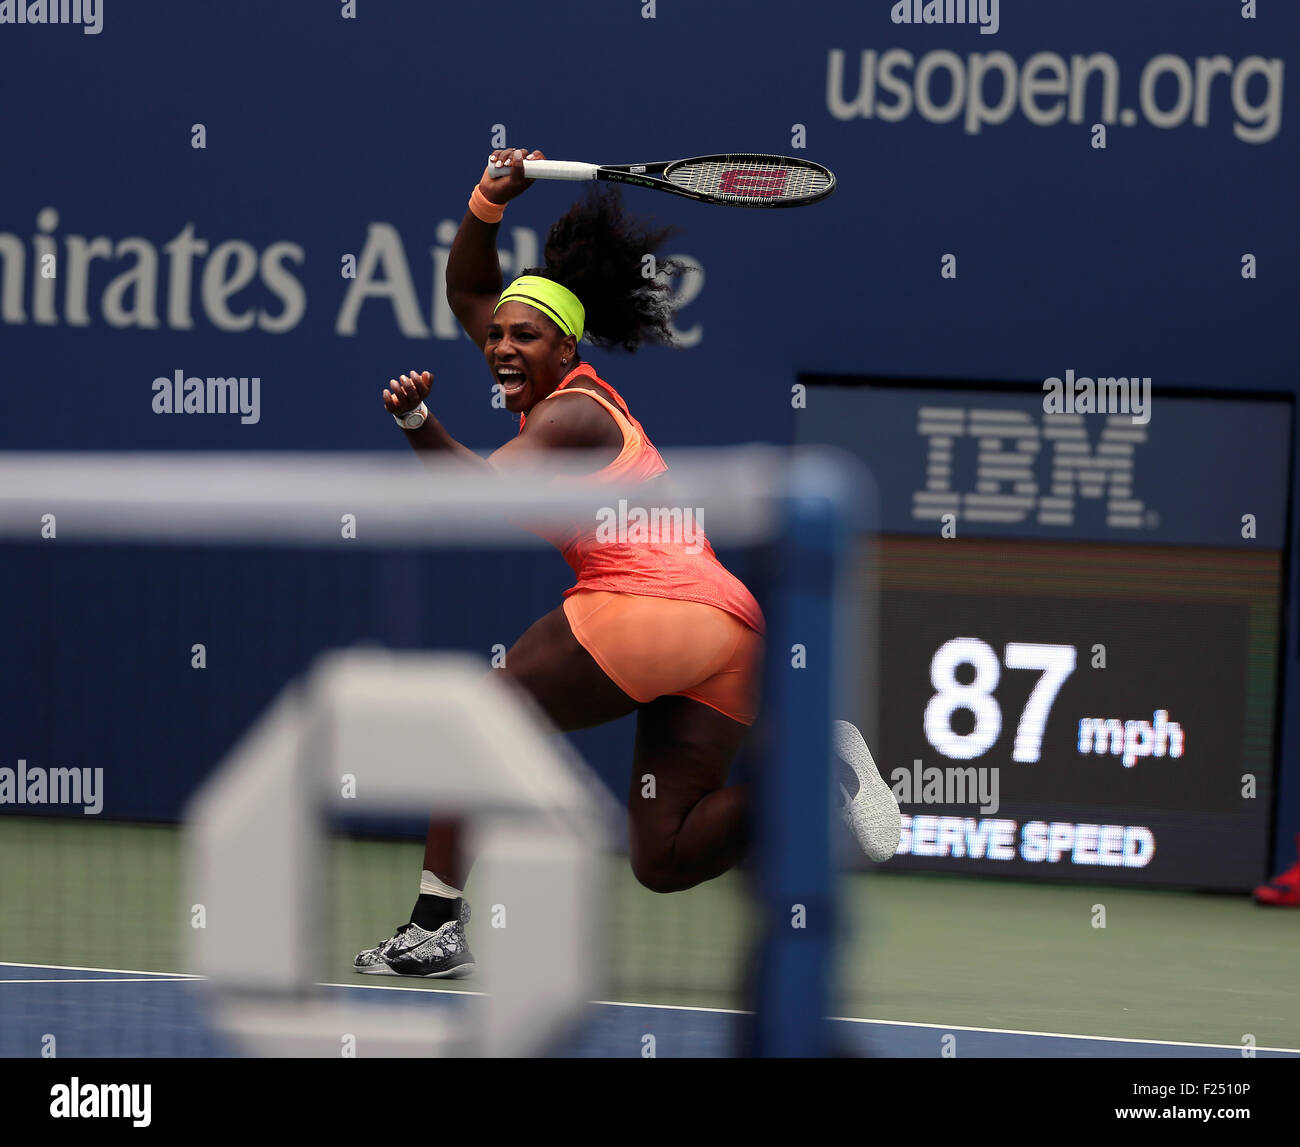 Flushing Meadows, New York, USA. 11th Sep, 2015. Serena Williams returns a shot to Roberta Vinci of Italy in their semifinal match at the U.S. Open in Flushing Meadows, New York on the afternoon of September 11th, 2015.  Vinci won the match 2-6, 6-4, 6-4, thwarting Williams bid for a Grand Slam. Credit:  Adam Stoltman/Alamy Live News Stock Photo